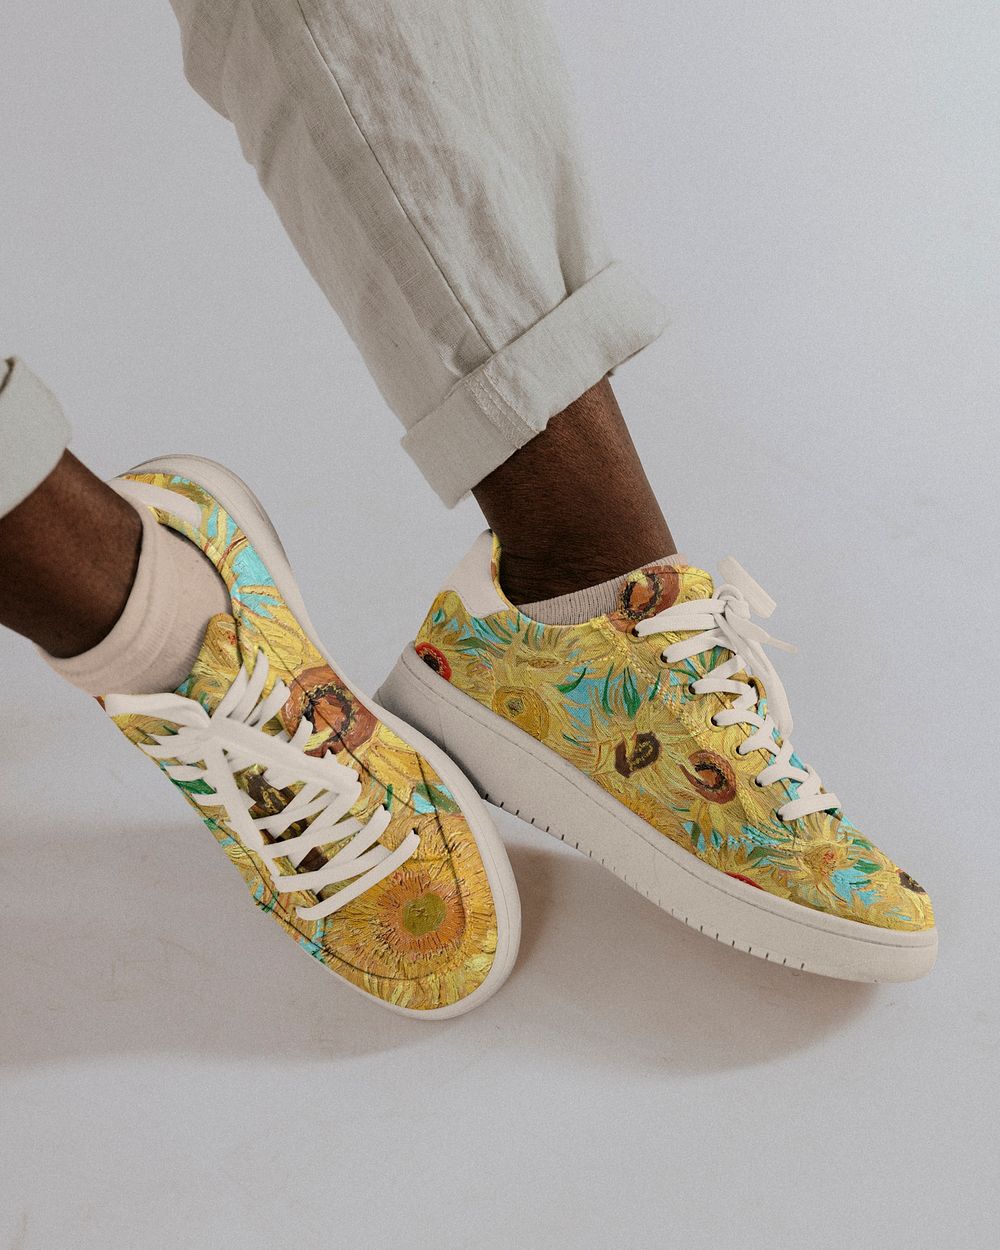 Van Gogh&rsquo;s Sunflowers patterned sneakers, remixed by rawpixel